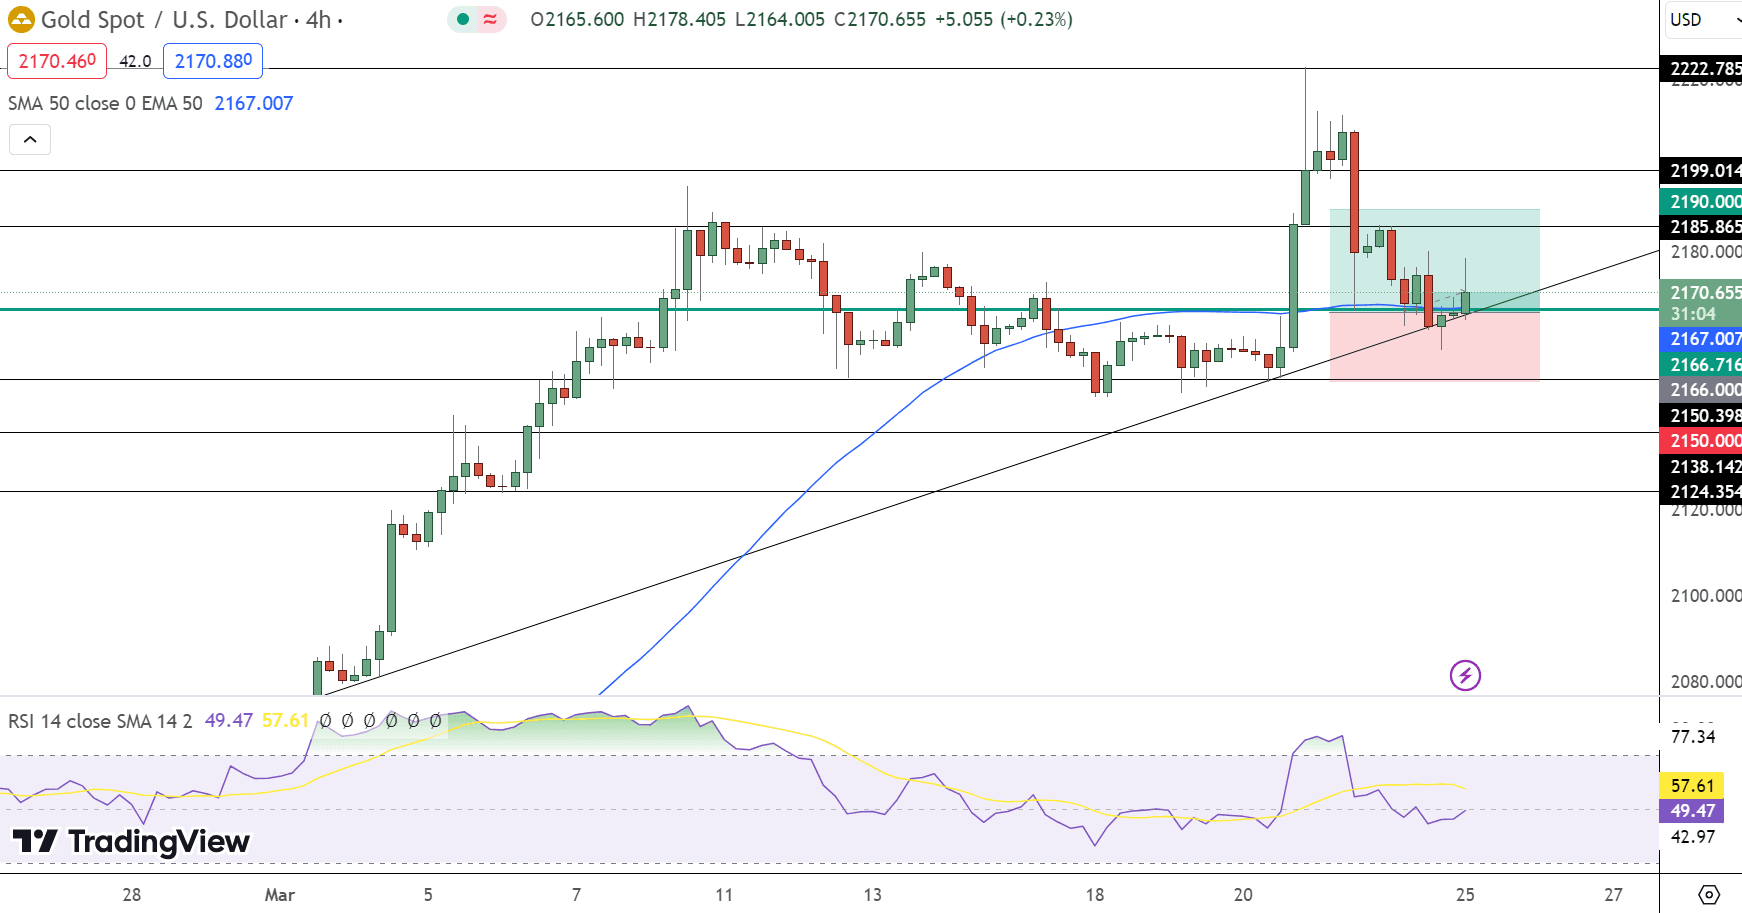 GOLD Price Chart - Source: Tradingview